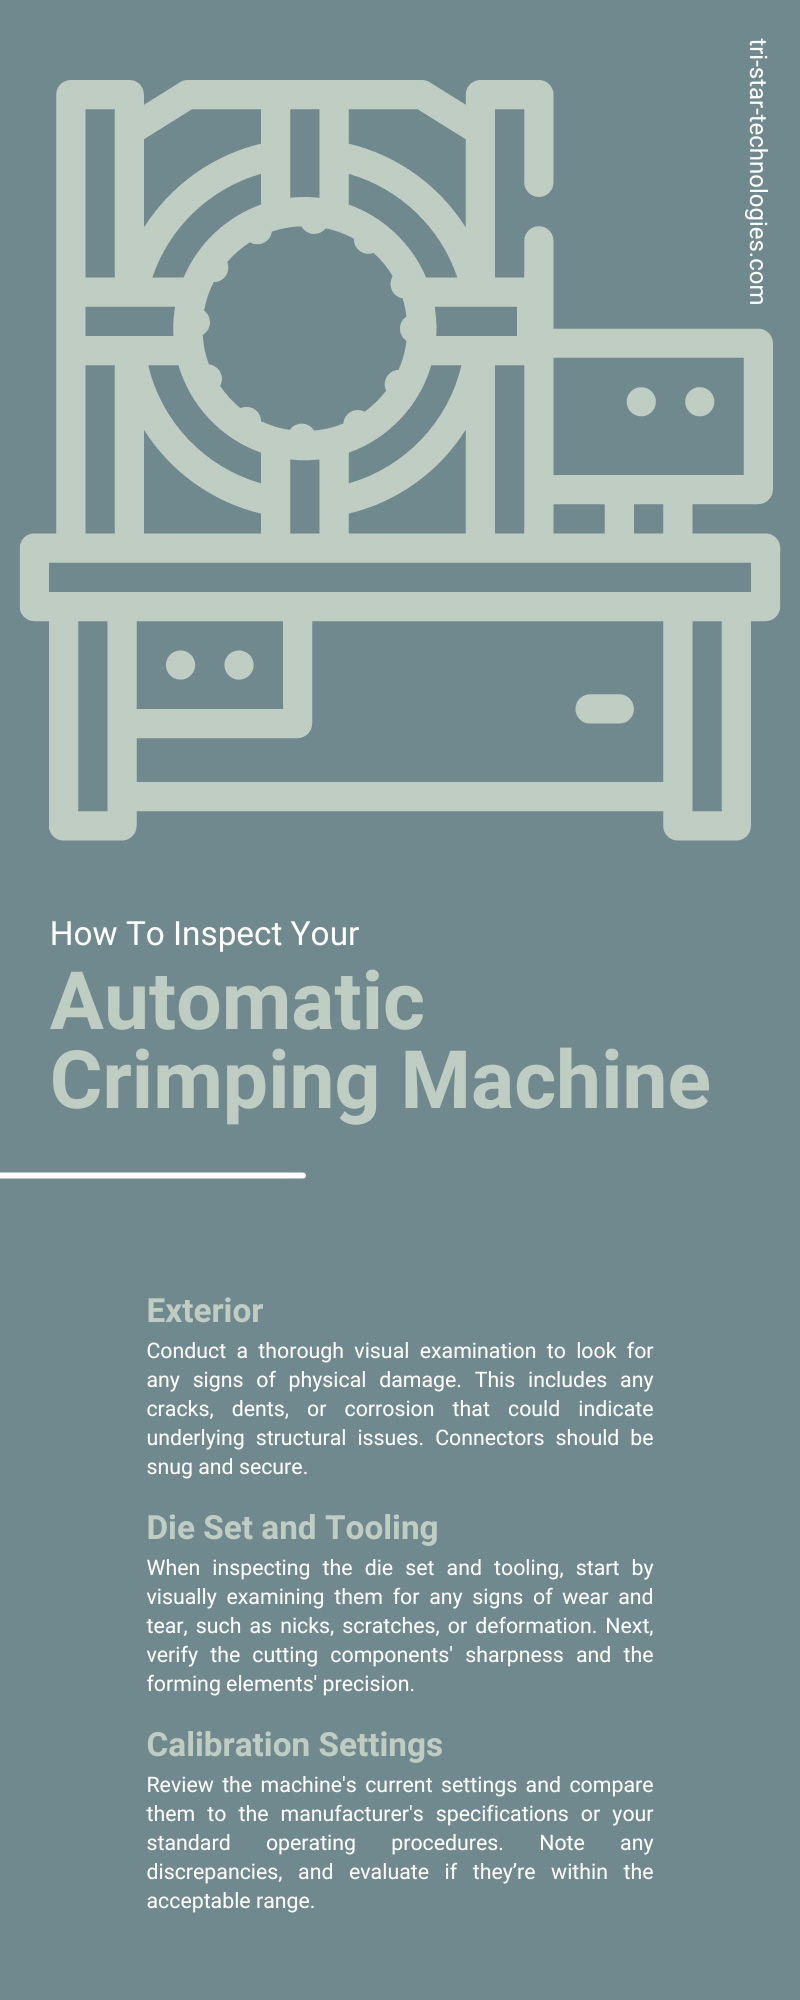 How To Inspect Your Automatic Crimping Machine